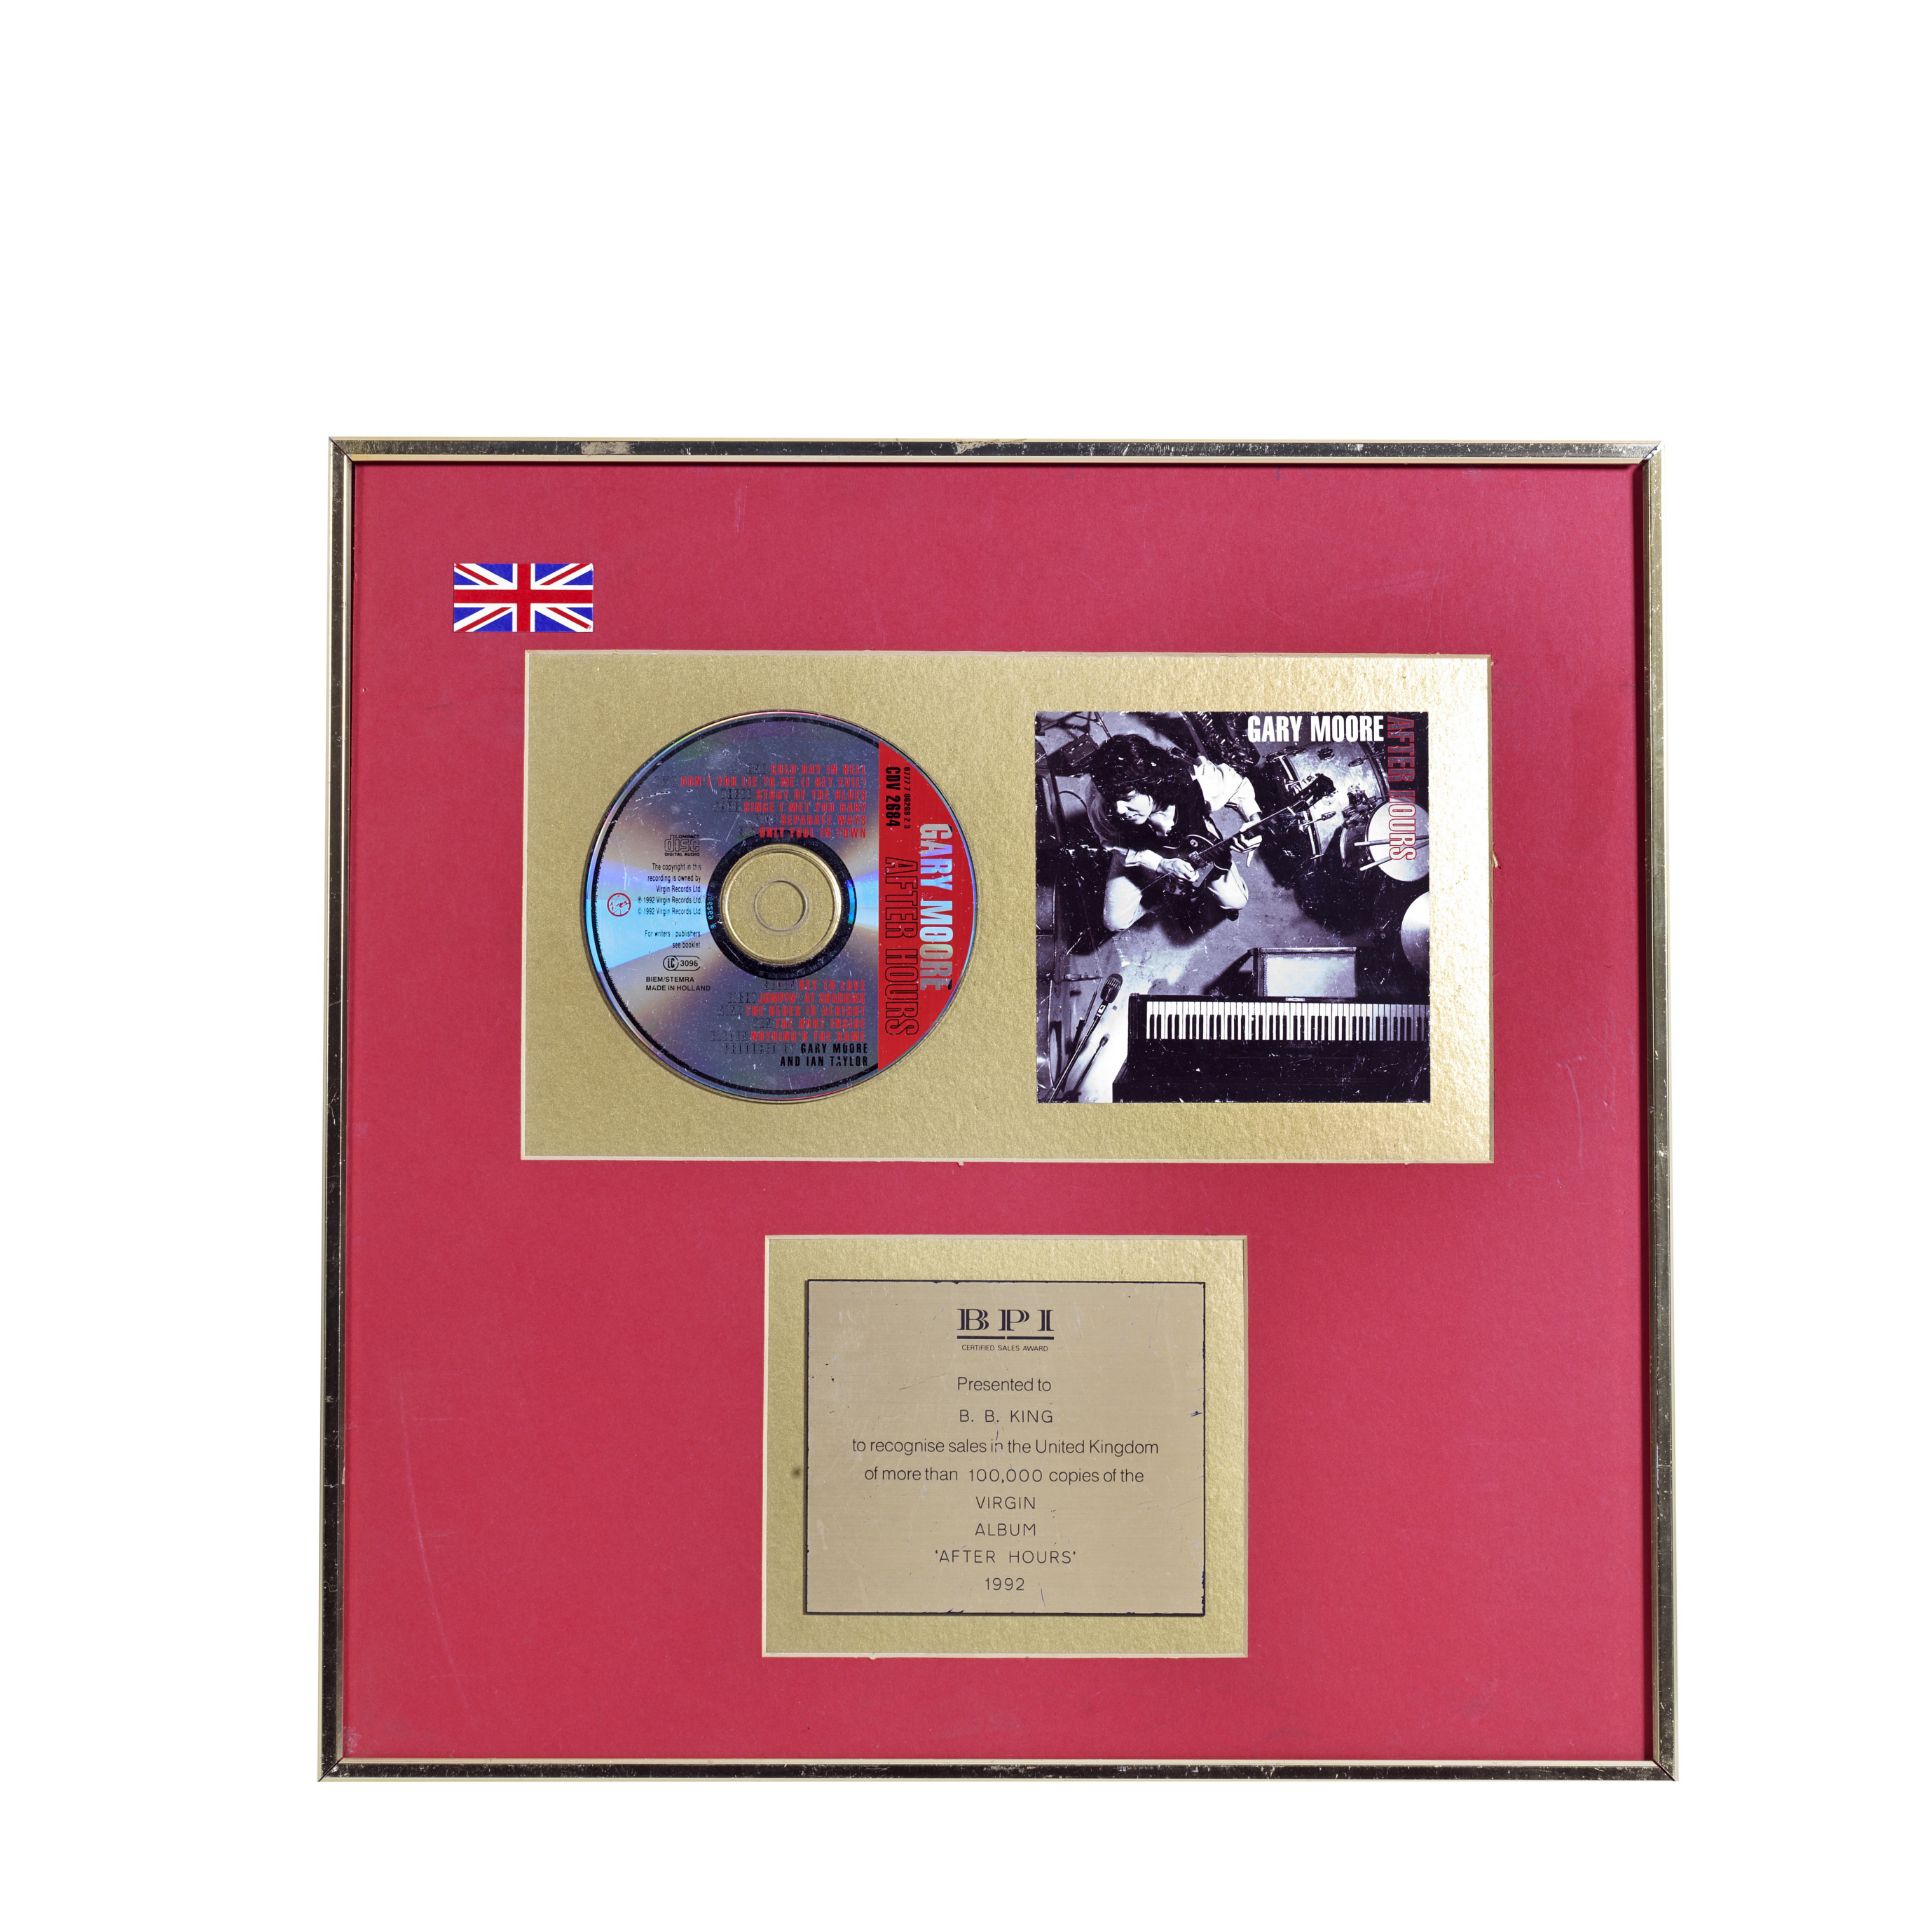 B.B. KING: A 'Gold' Award For the Album After Hours By Gary Moore, 1992,